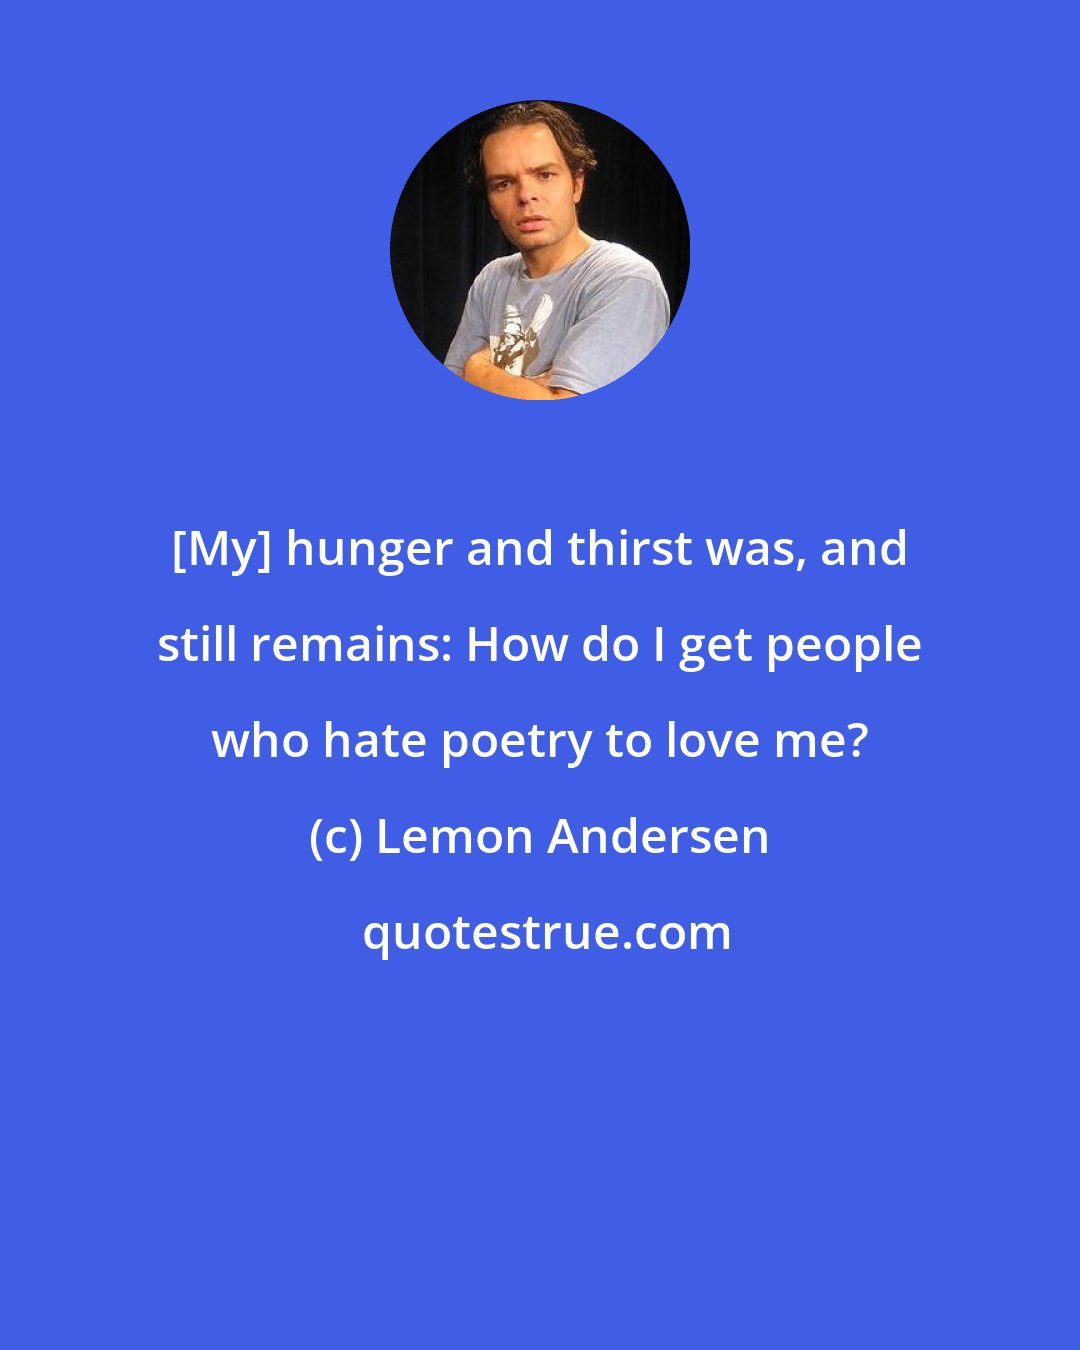 Lemon Andersen: [My] hunger and thirst was, and still remains: How do I get people who hate poetry to love me?